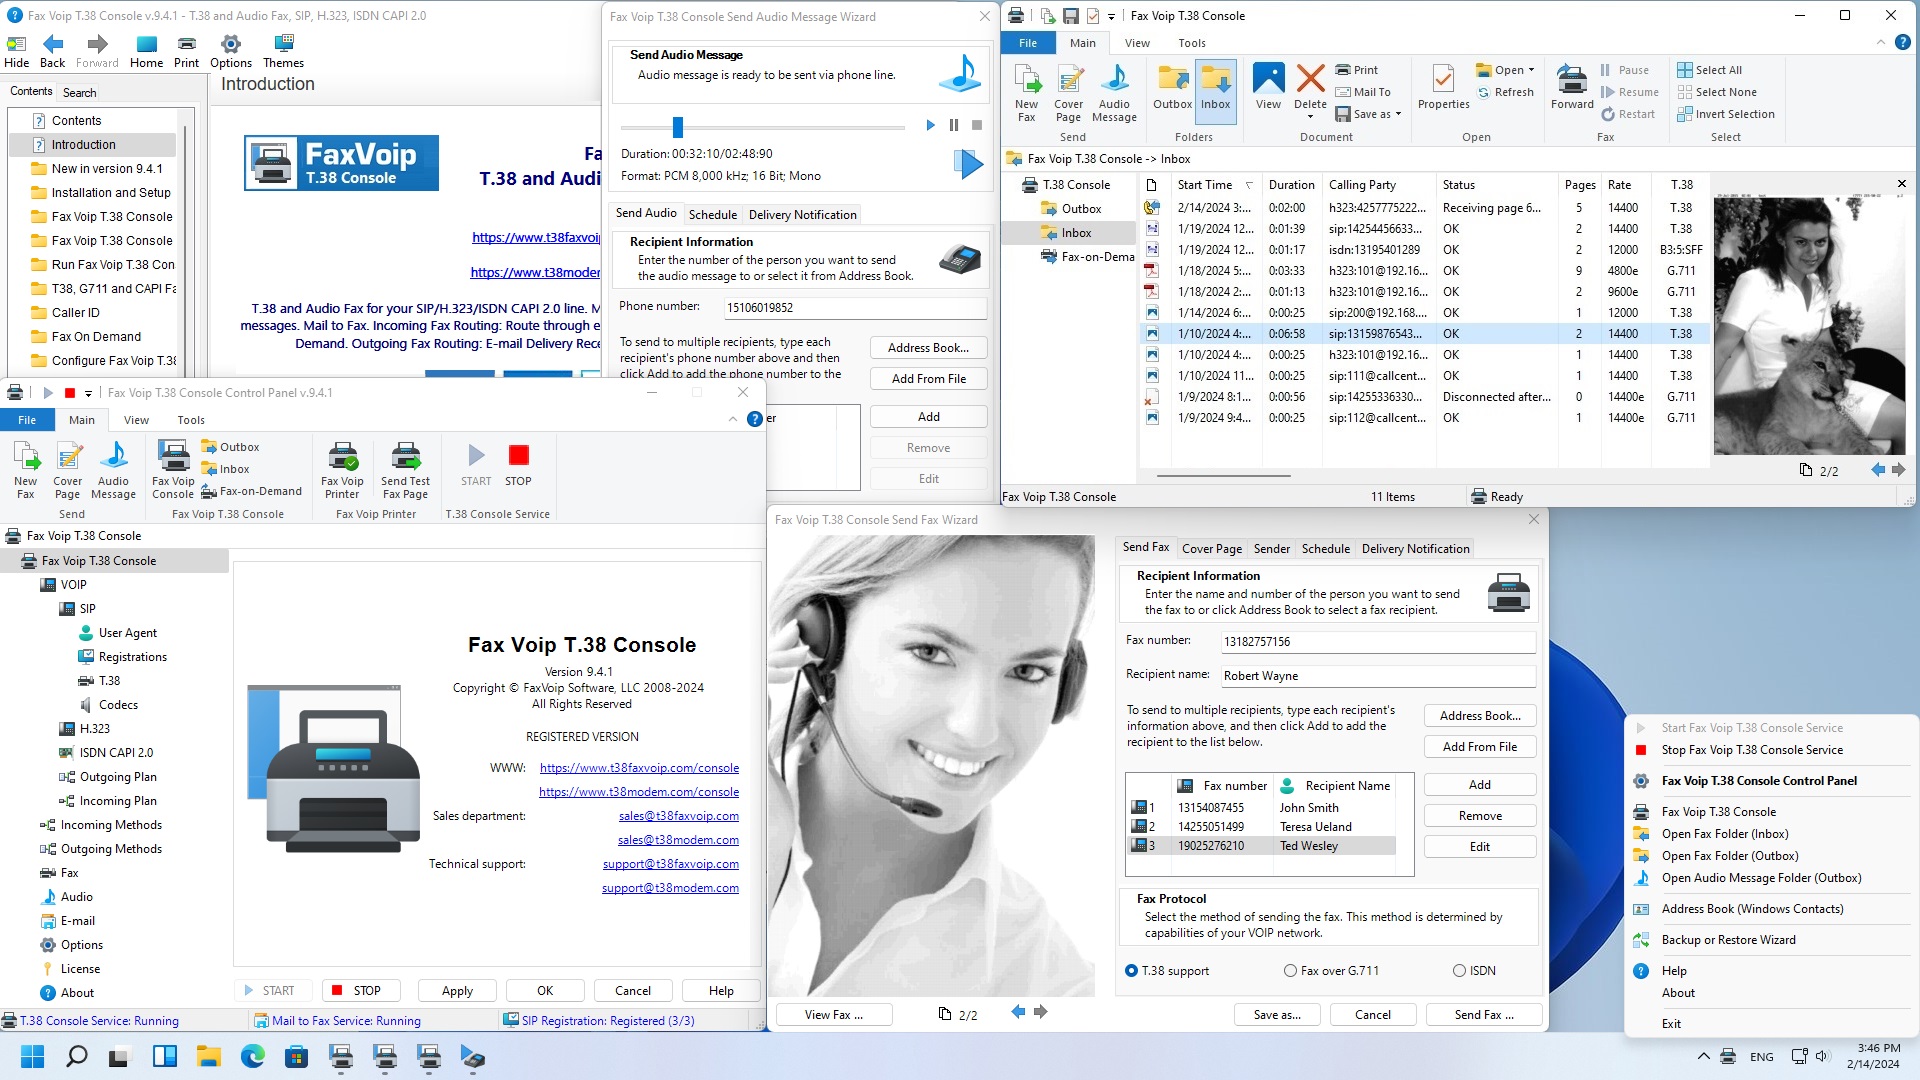 Screenshot of Fax Voip T.38 Console 9.2.1